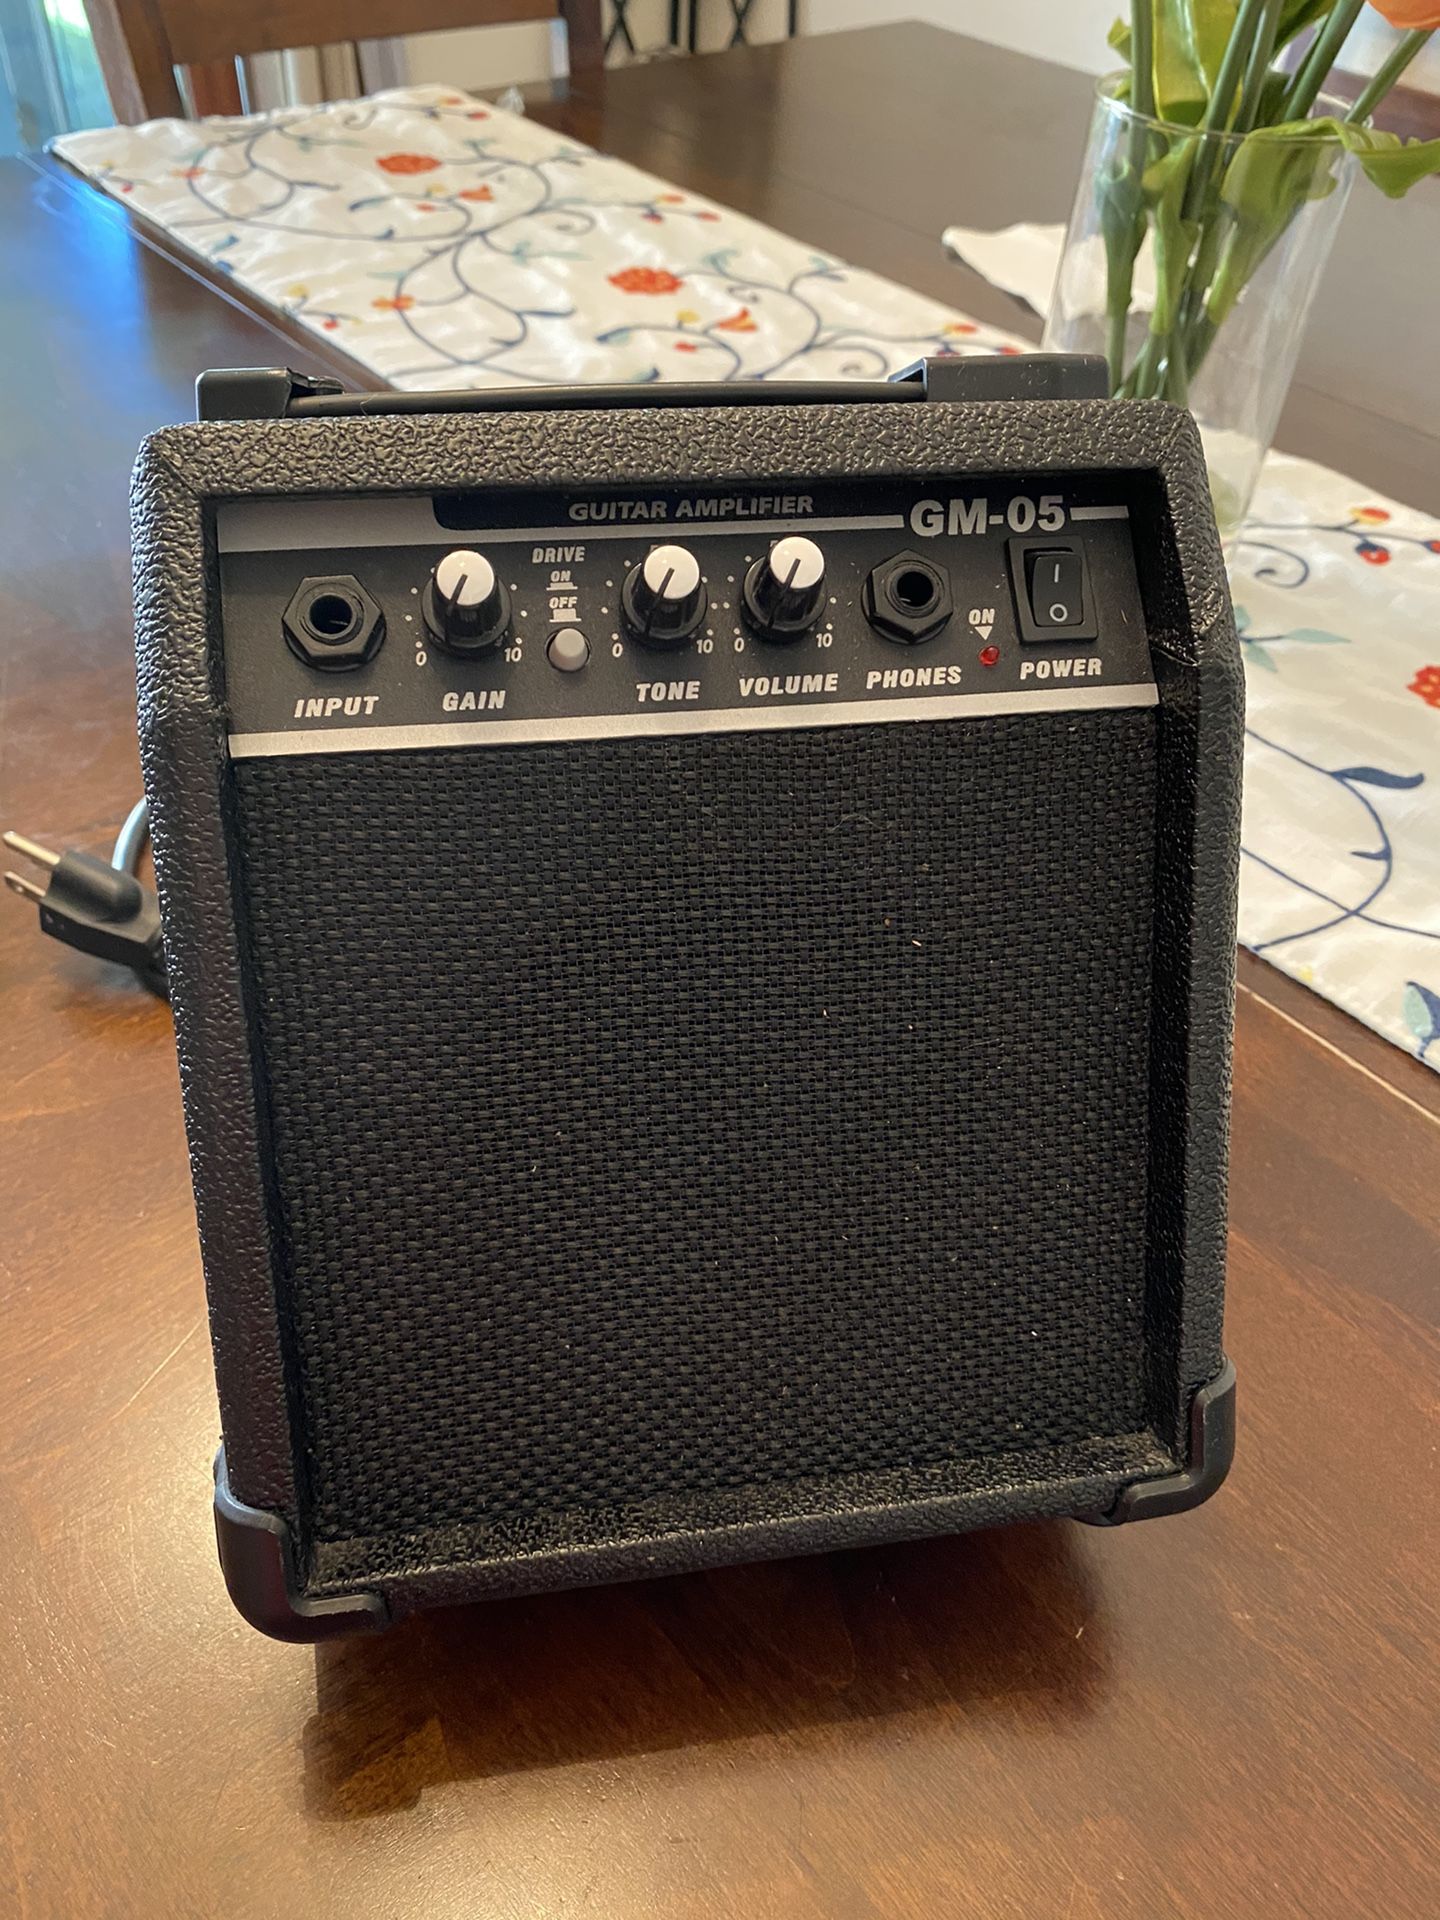 Mini MAESTRO BY GIBSON Electric Guitar Amp GM-05 AMPLIFIER